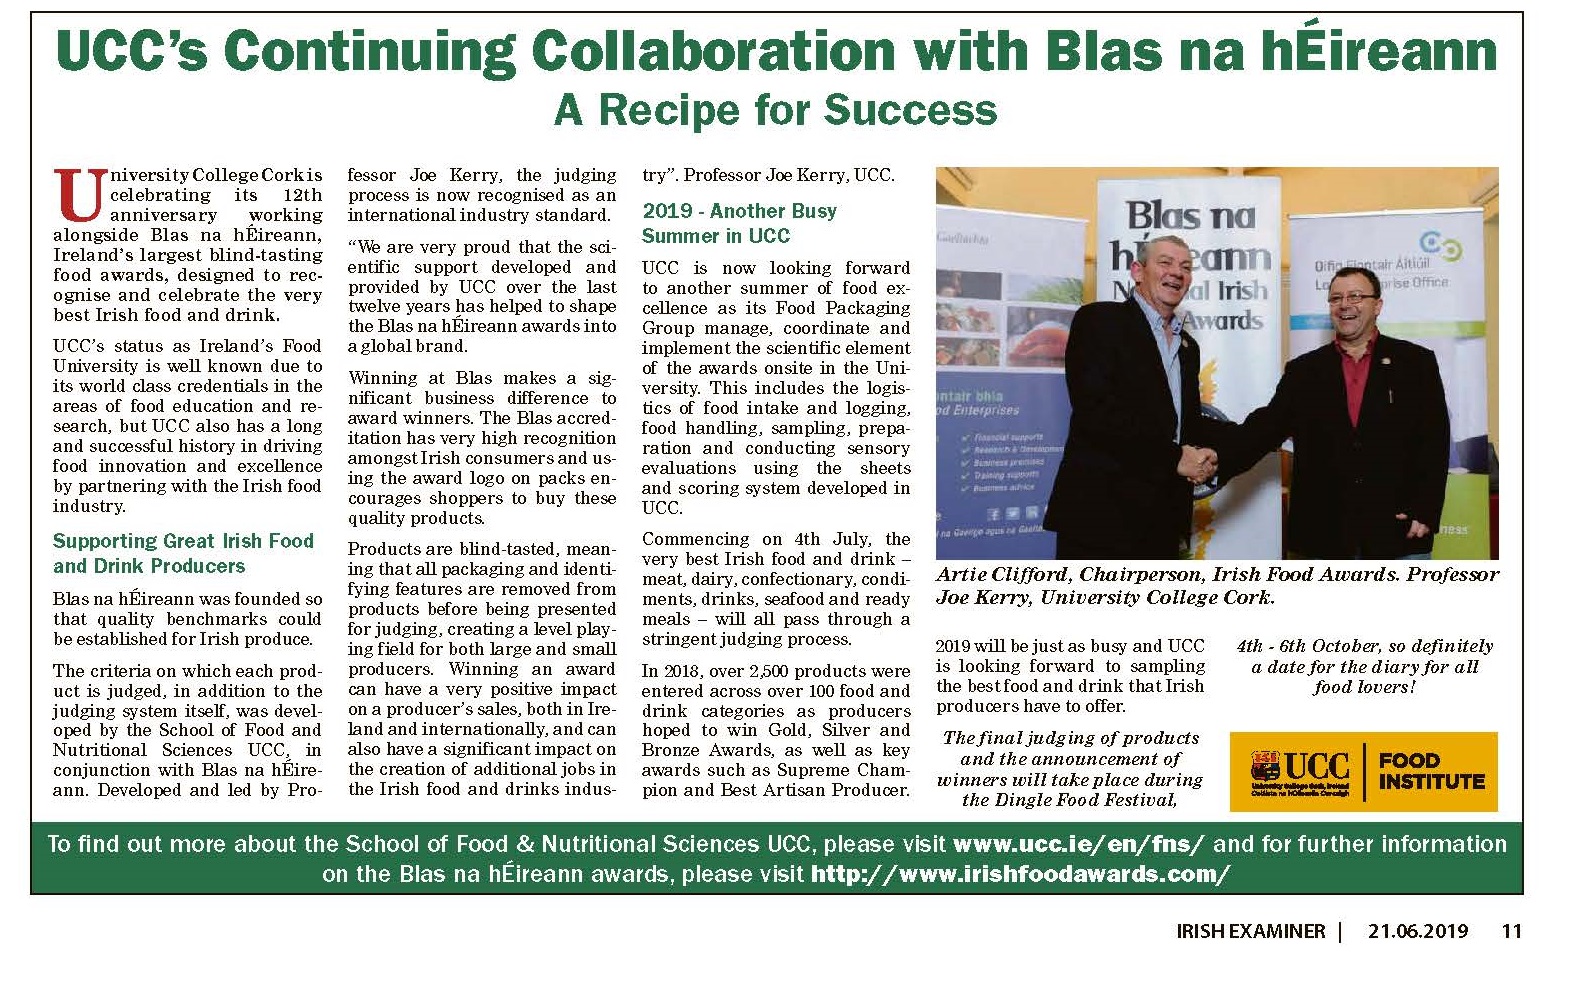 UCC's Continuing Collaboration with Blas na hEireann